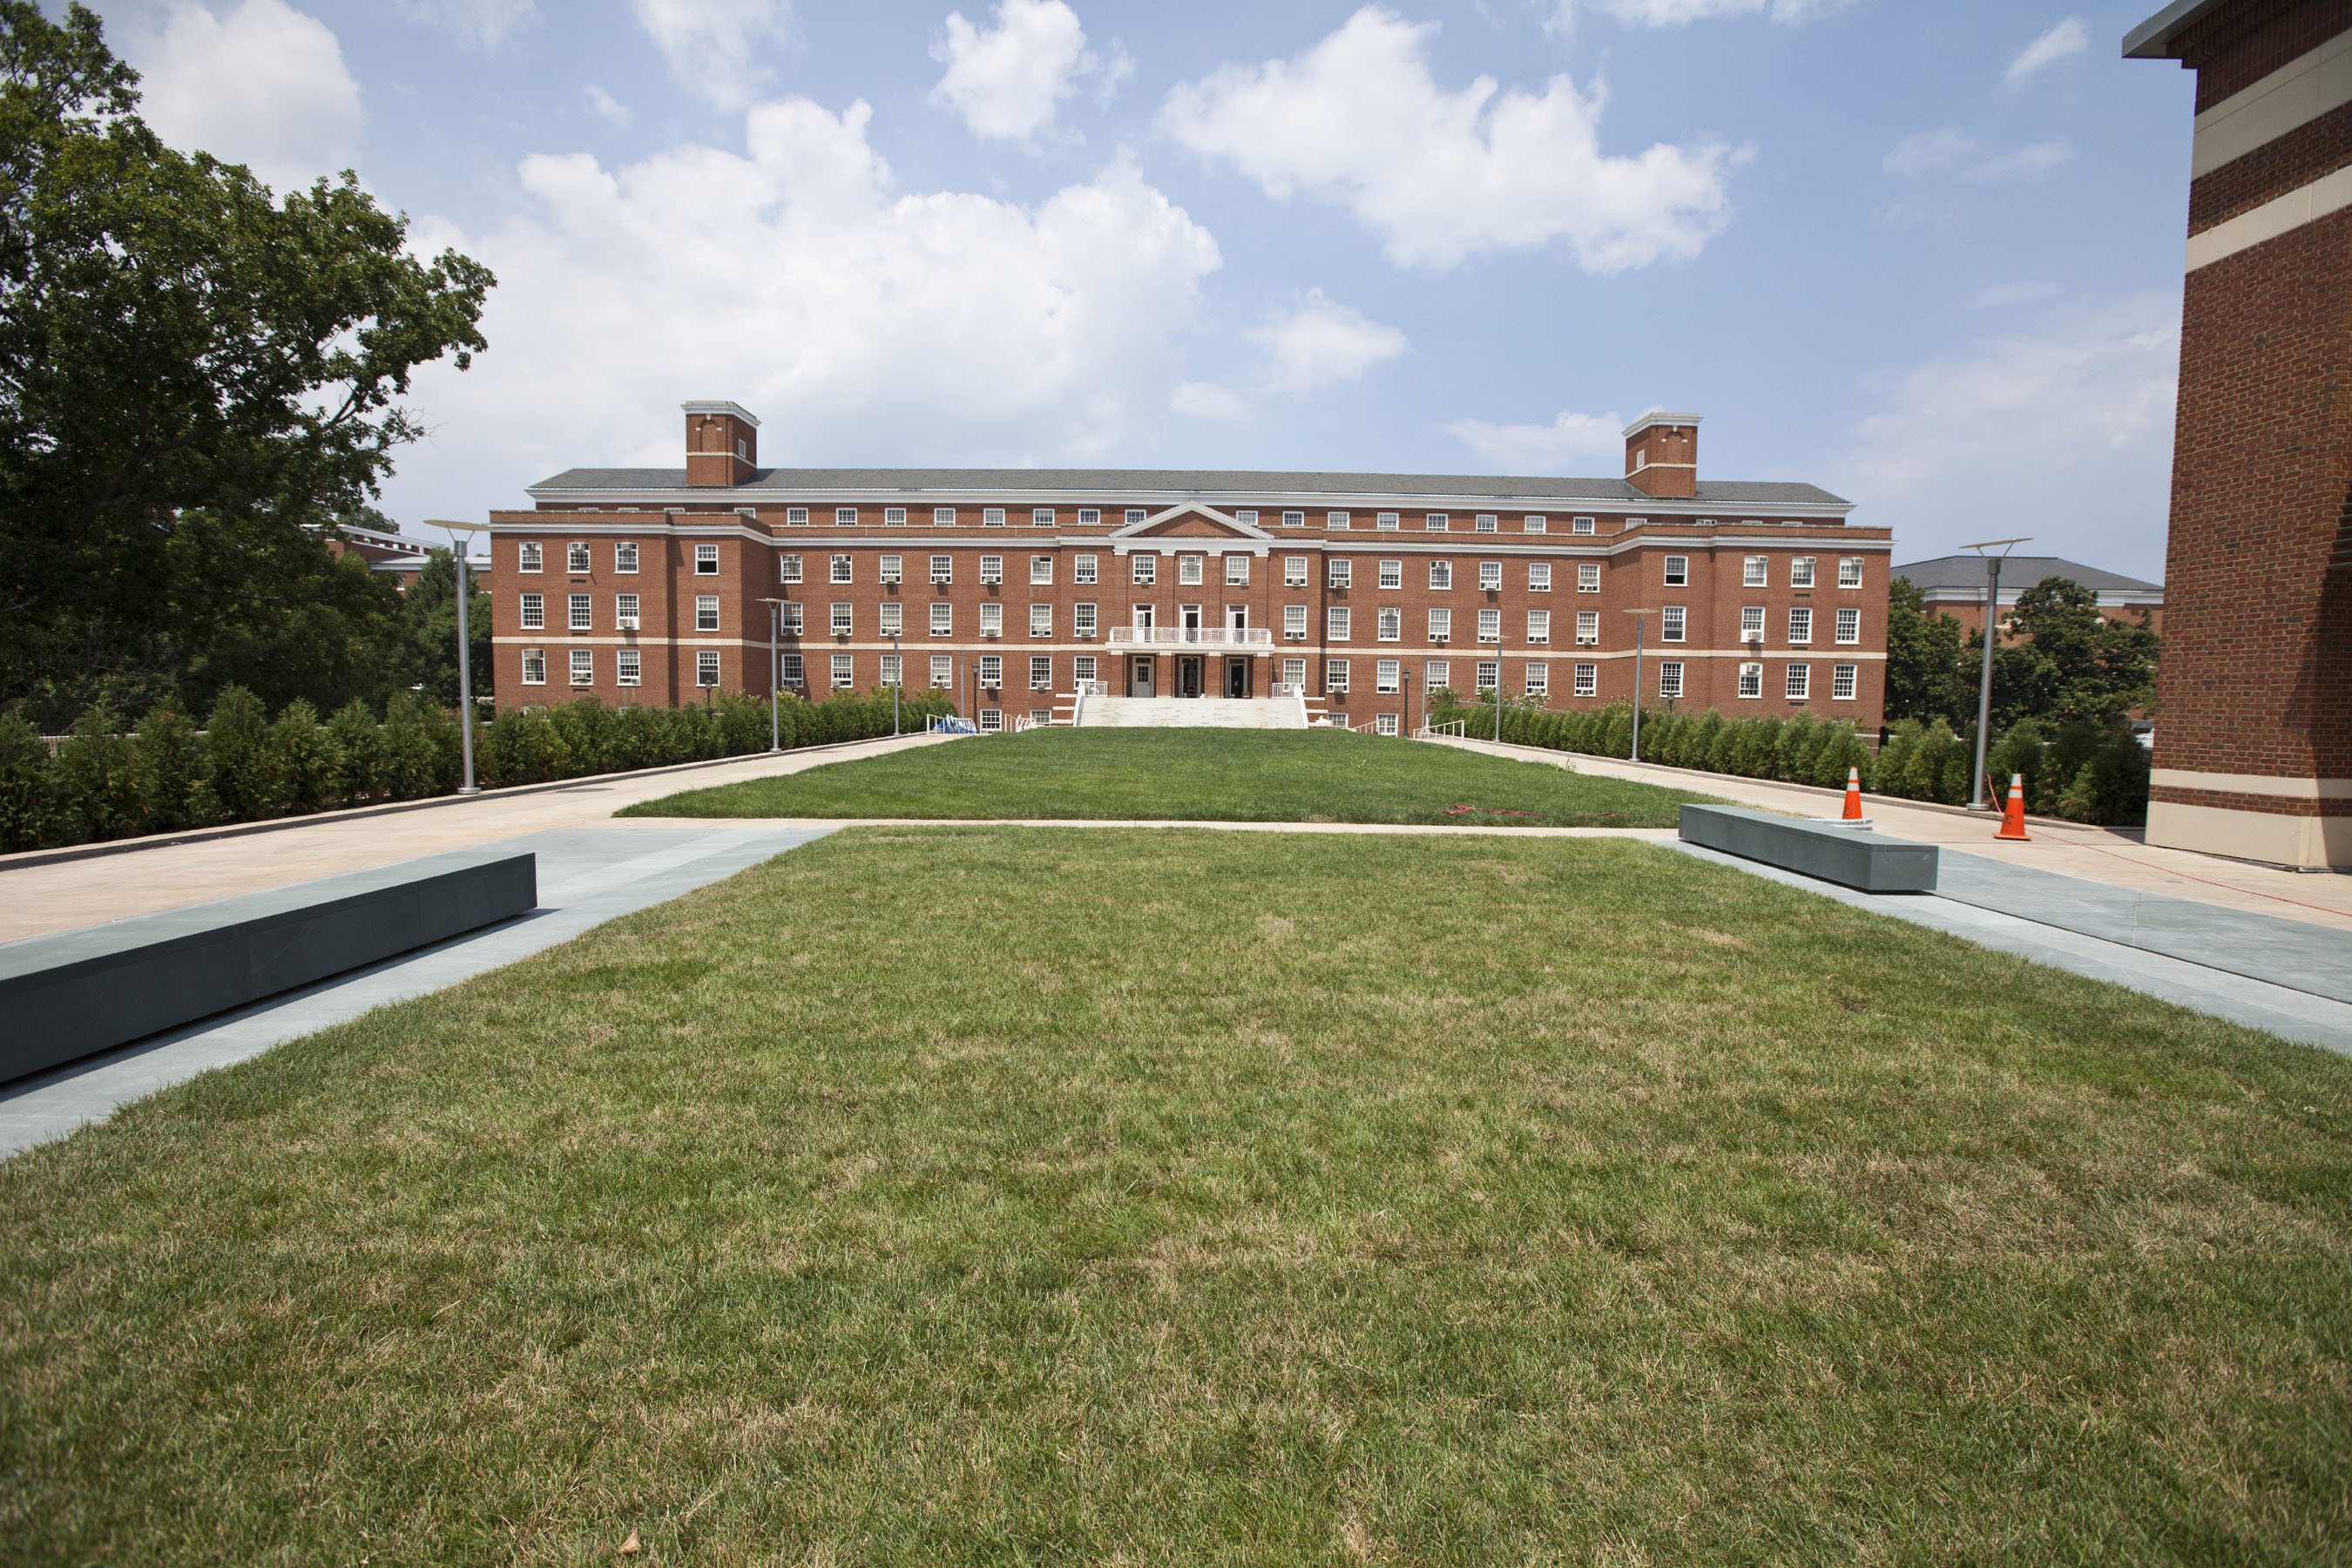 Multi story brick building called New Cabell Hall